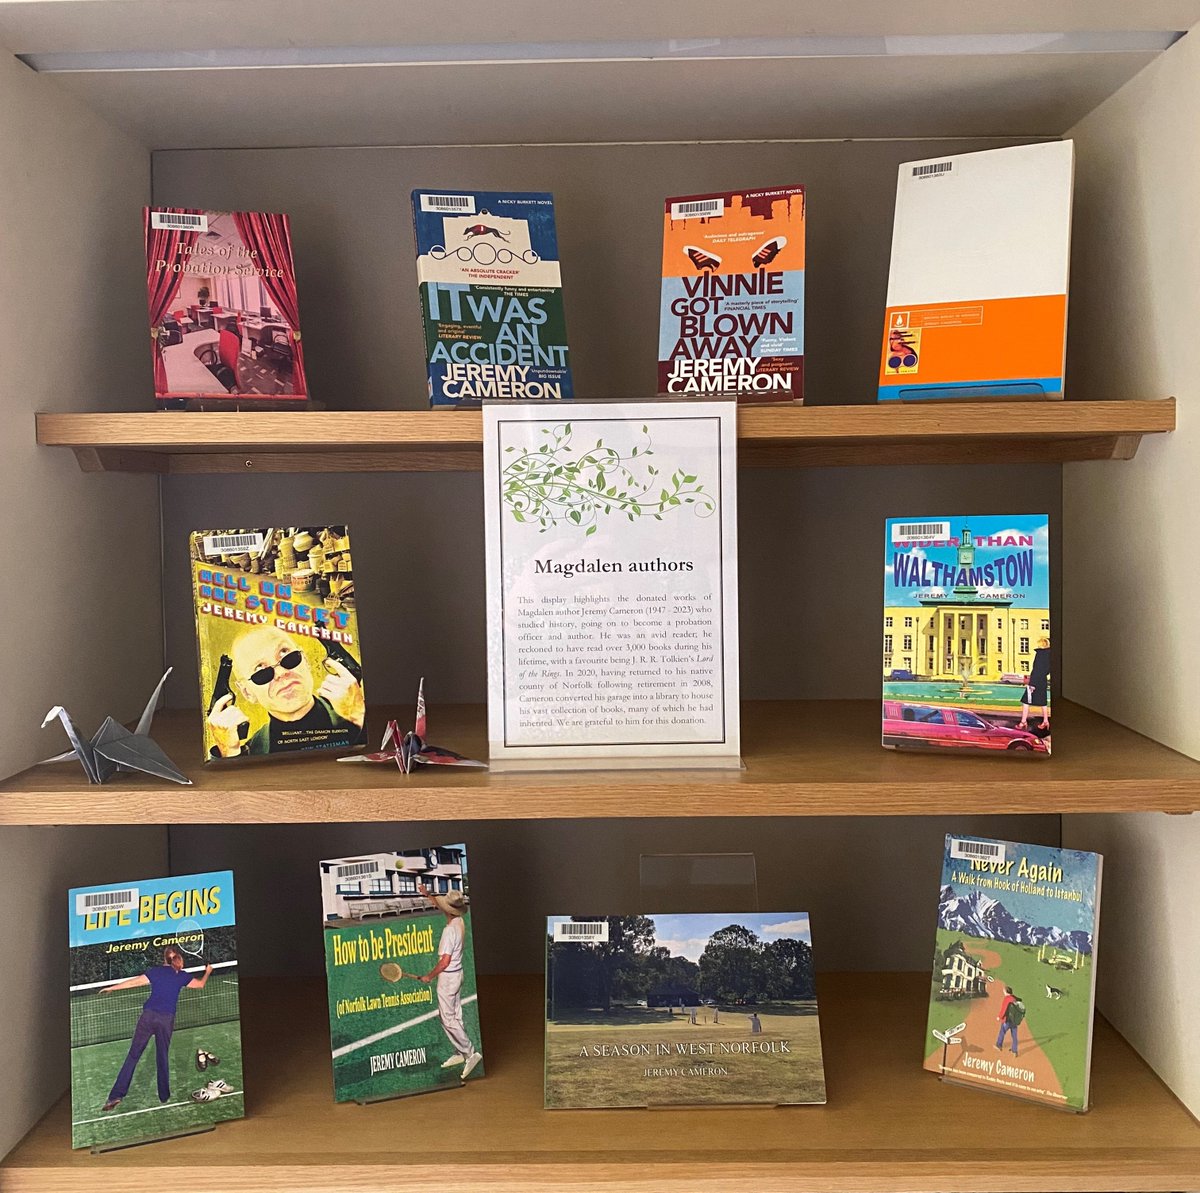 Our latest display highlights the donated works of Jeremy Cameron (1947 - 2023) who studied history at Magdalen, going on to become a probation officer and author. In 2020 Cameron converted his home garage into a library to house his vast collection of books.